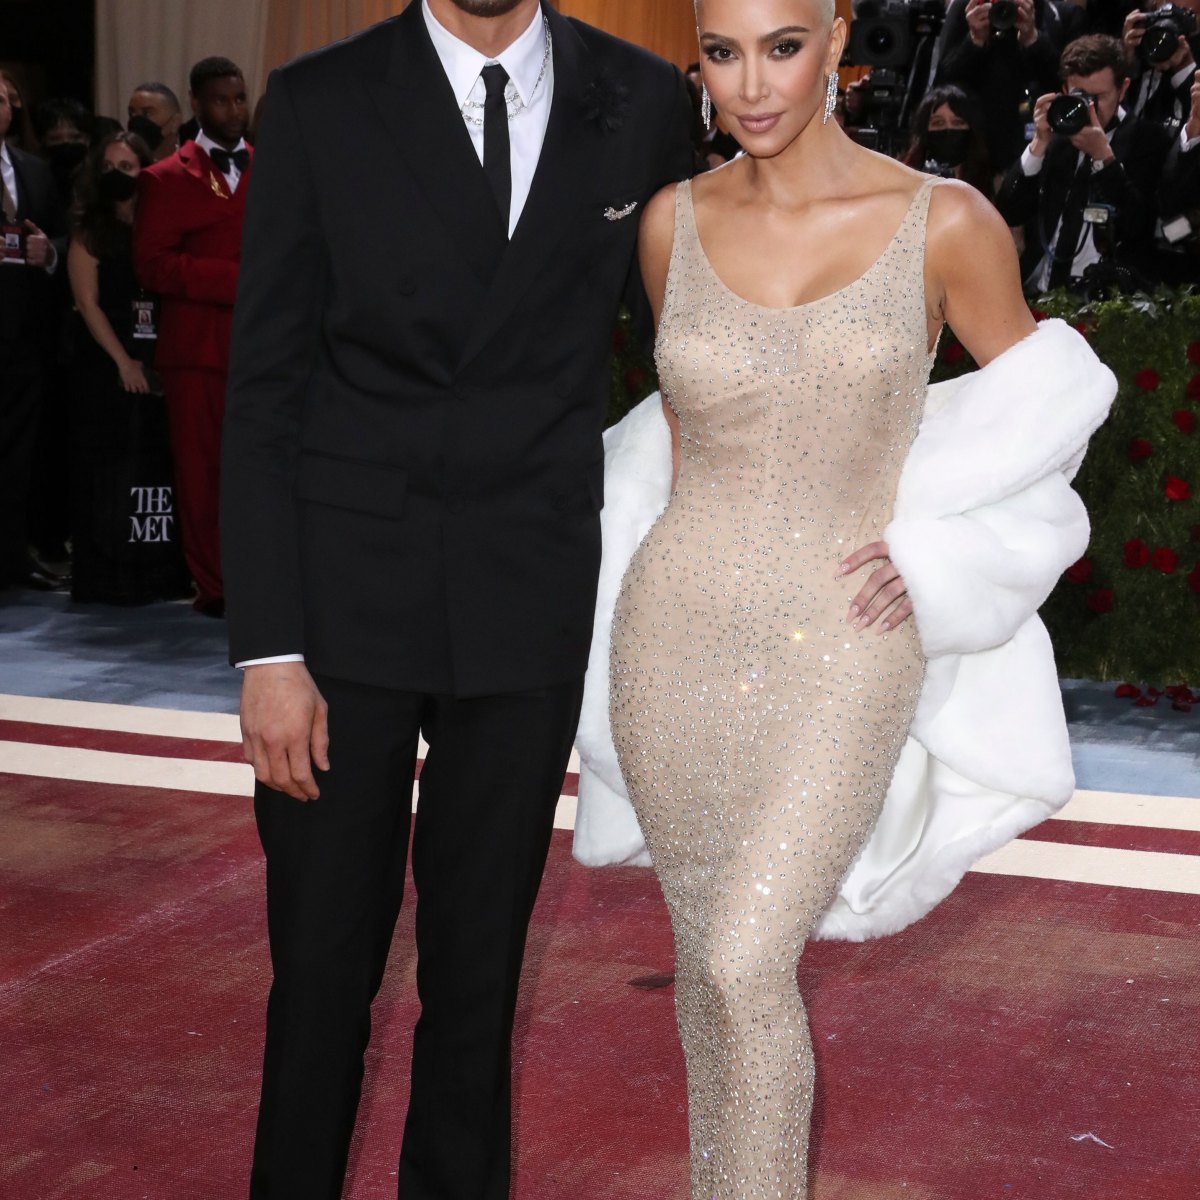 Met Gala 2022: Best looks and photos from the red carpet - The Washington  Post